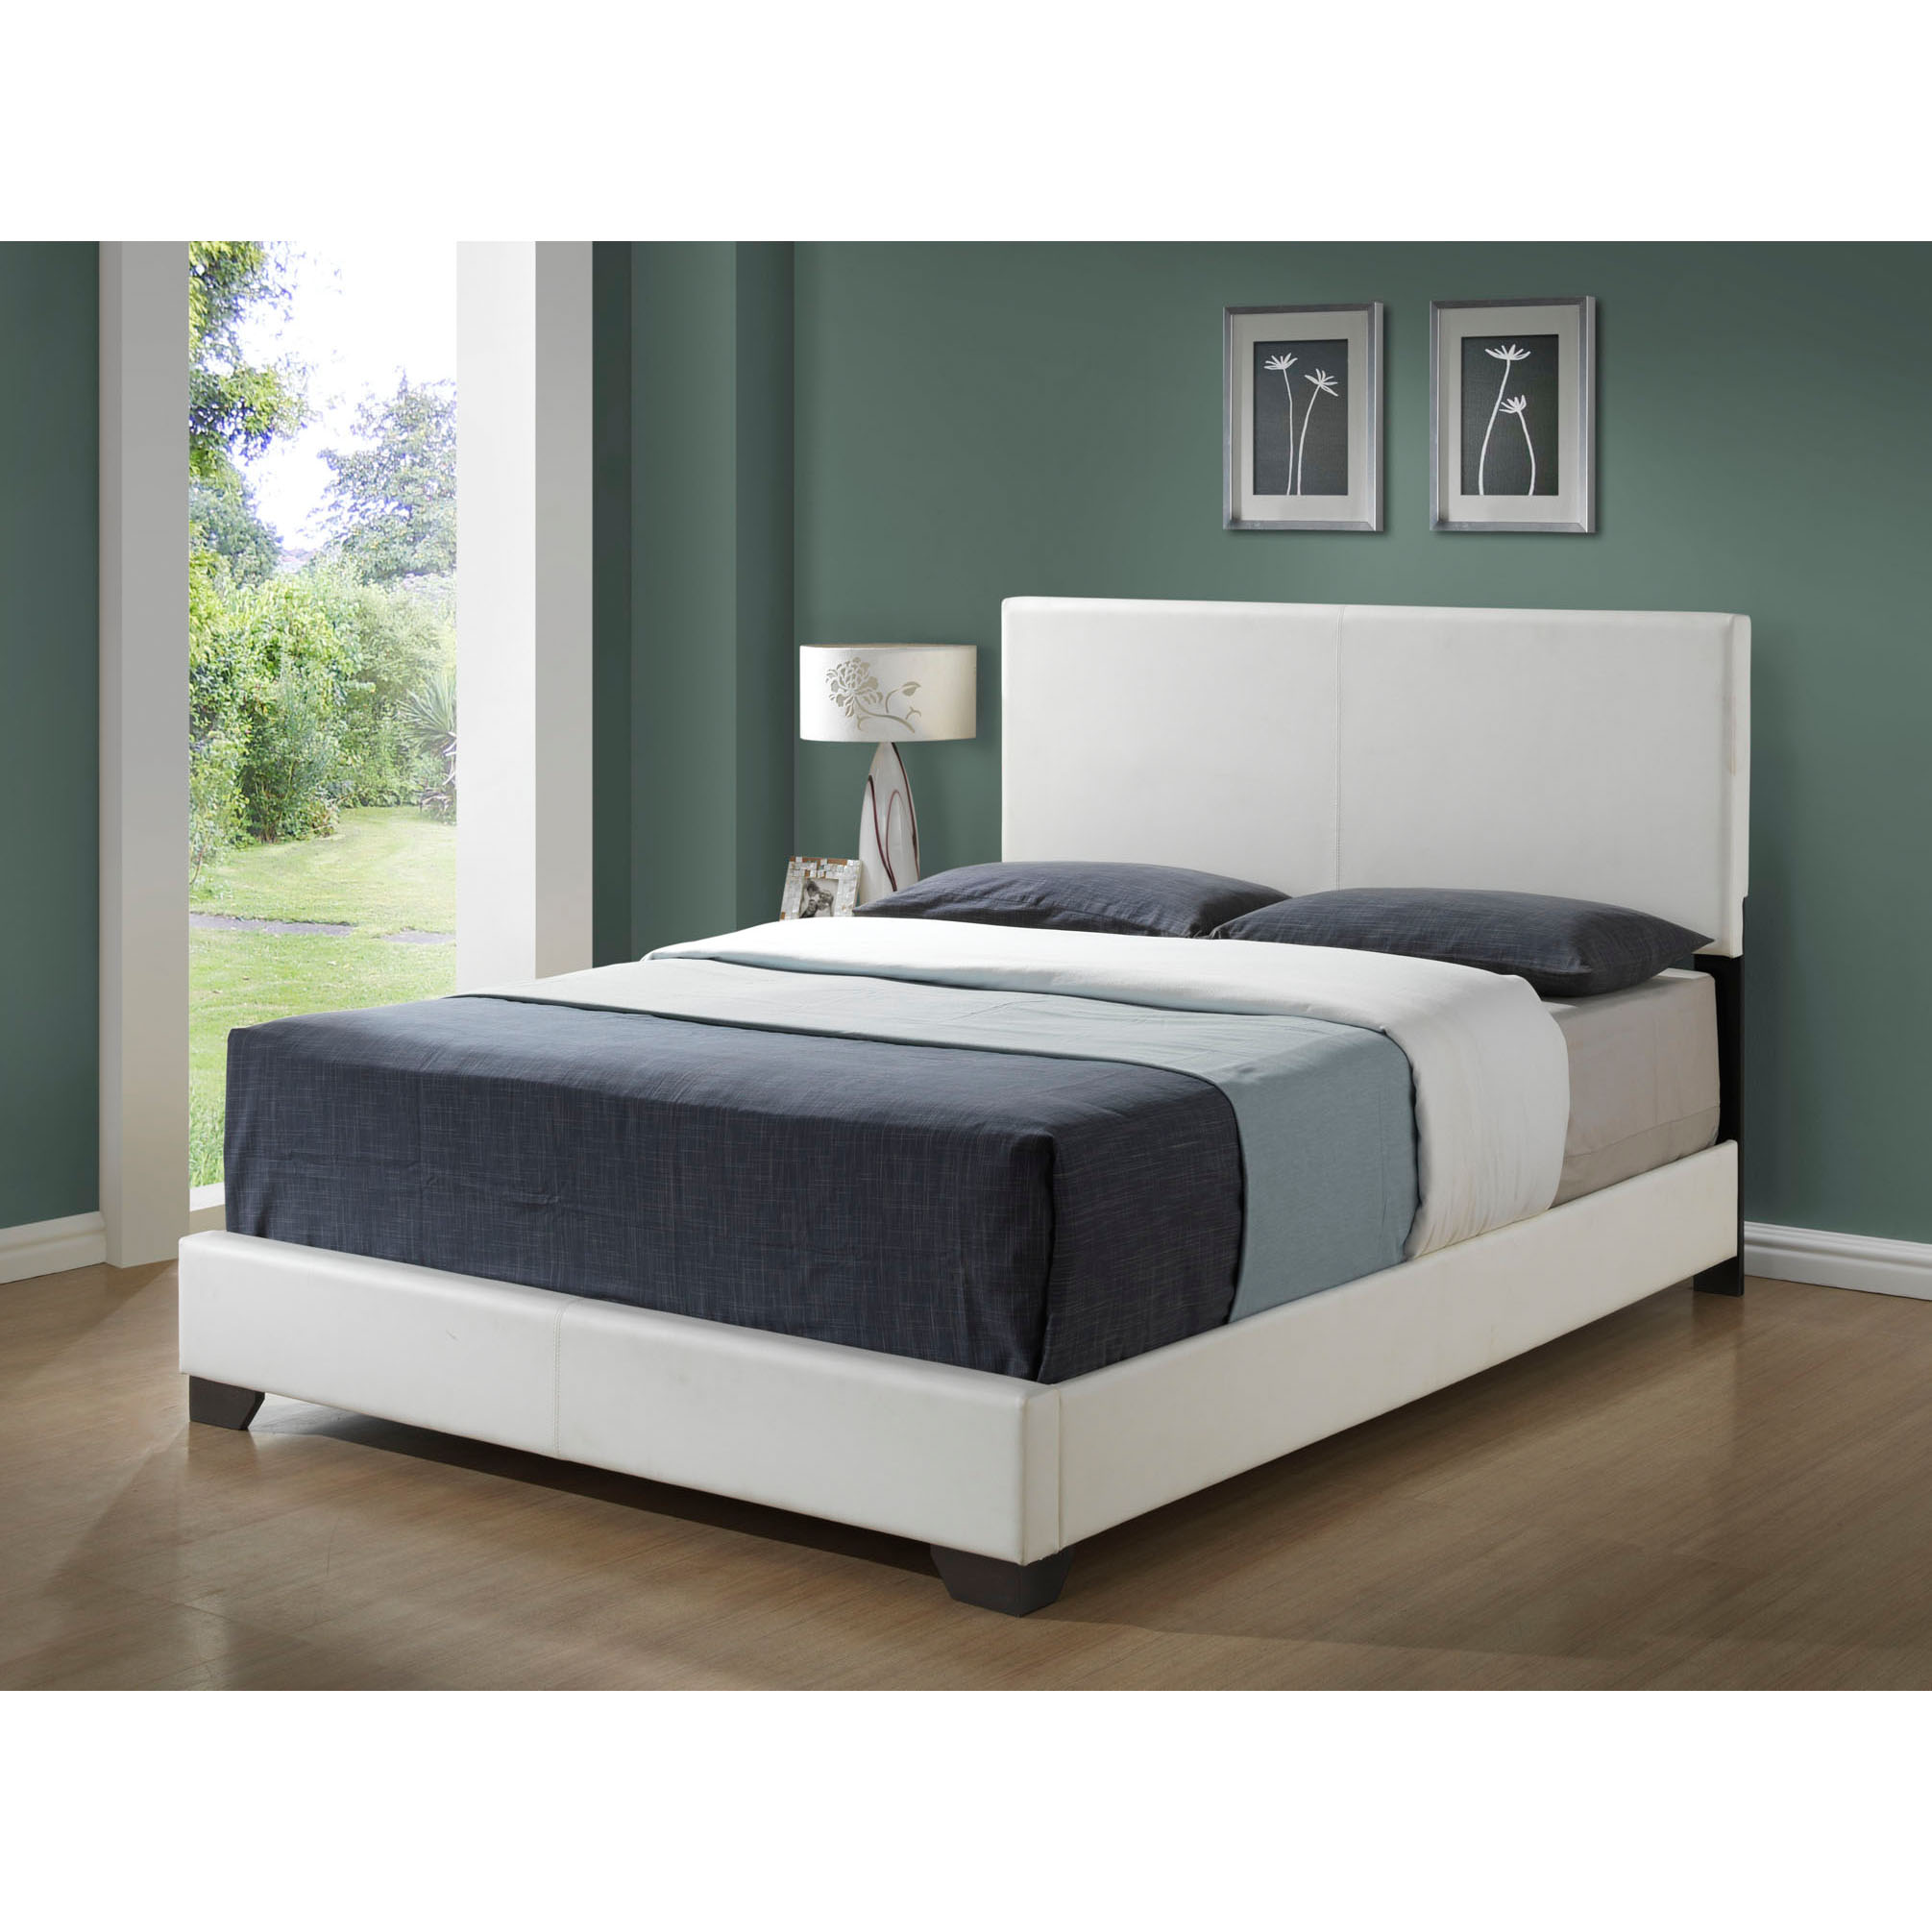 White Leather-look Queen Size Bed - 14352718 - Overstock ...
